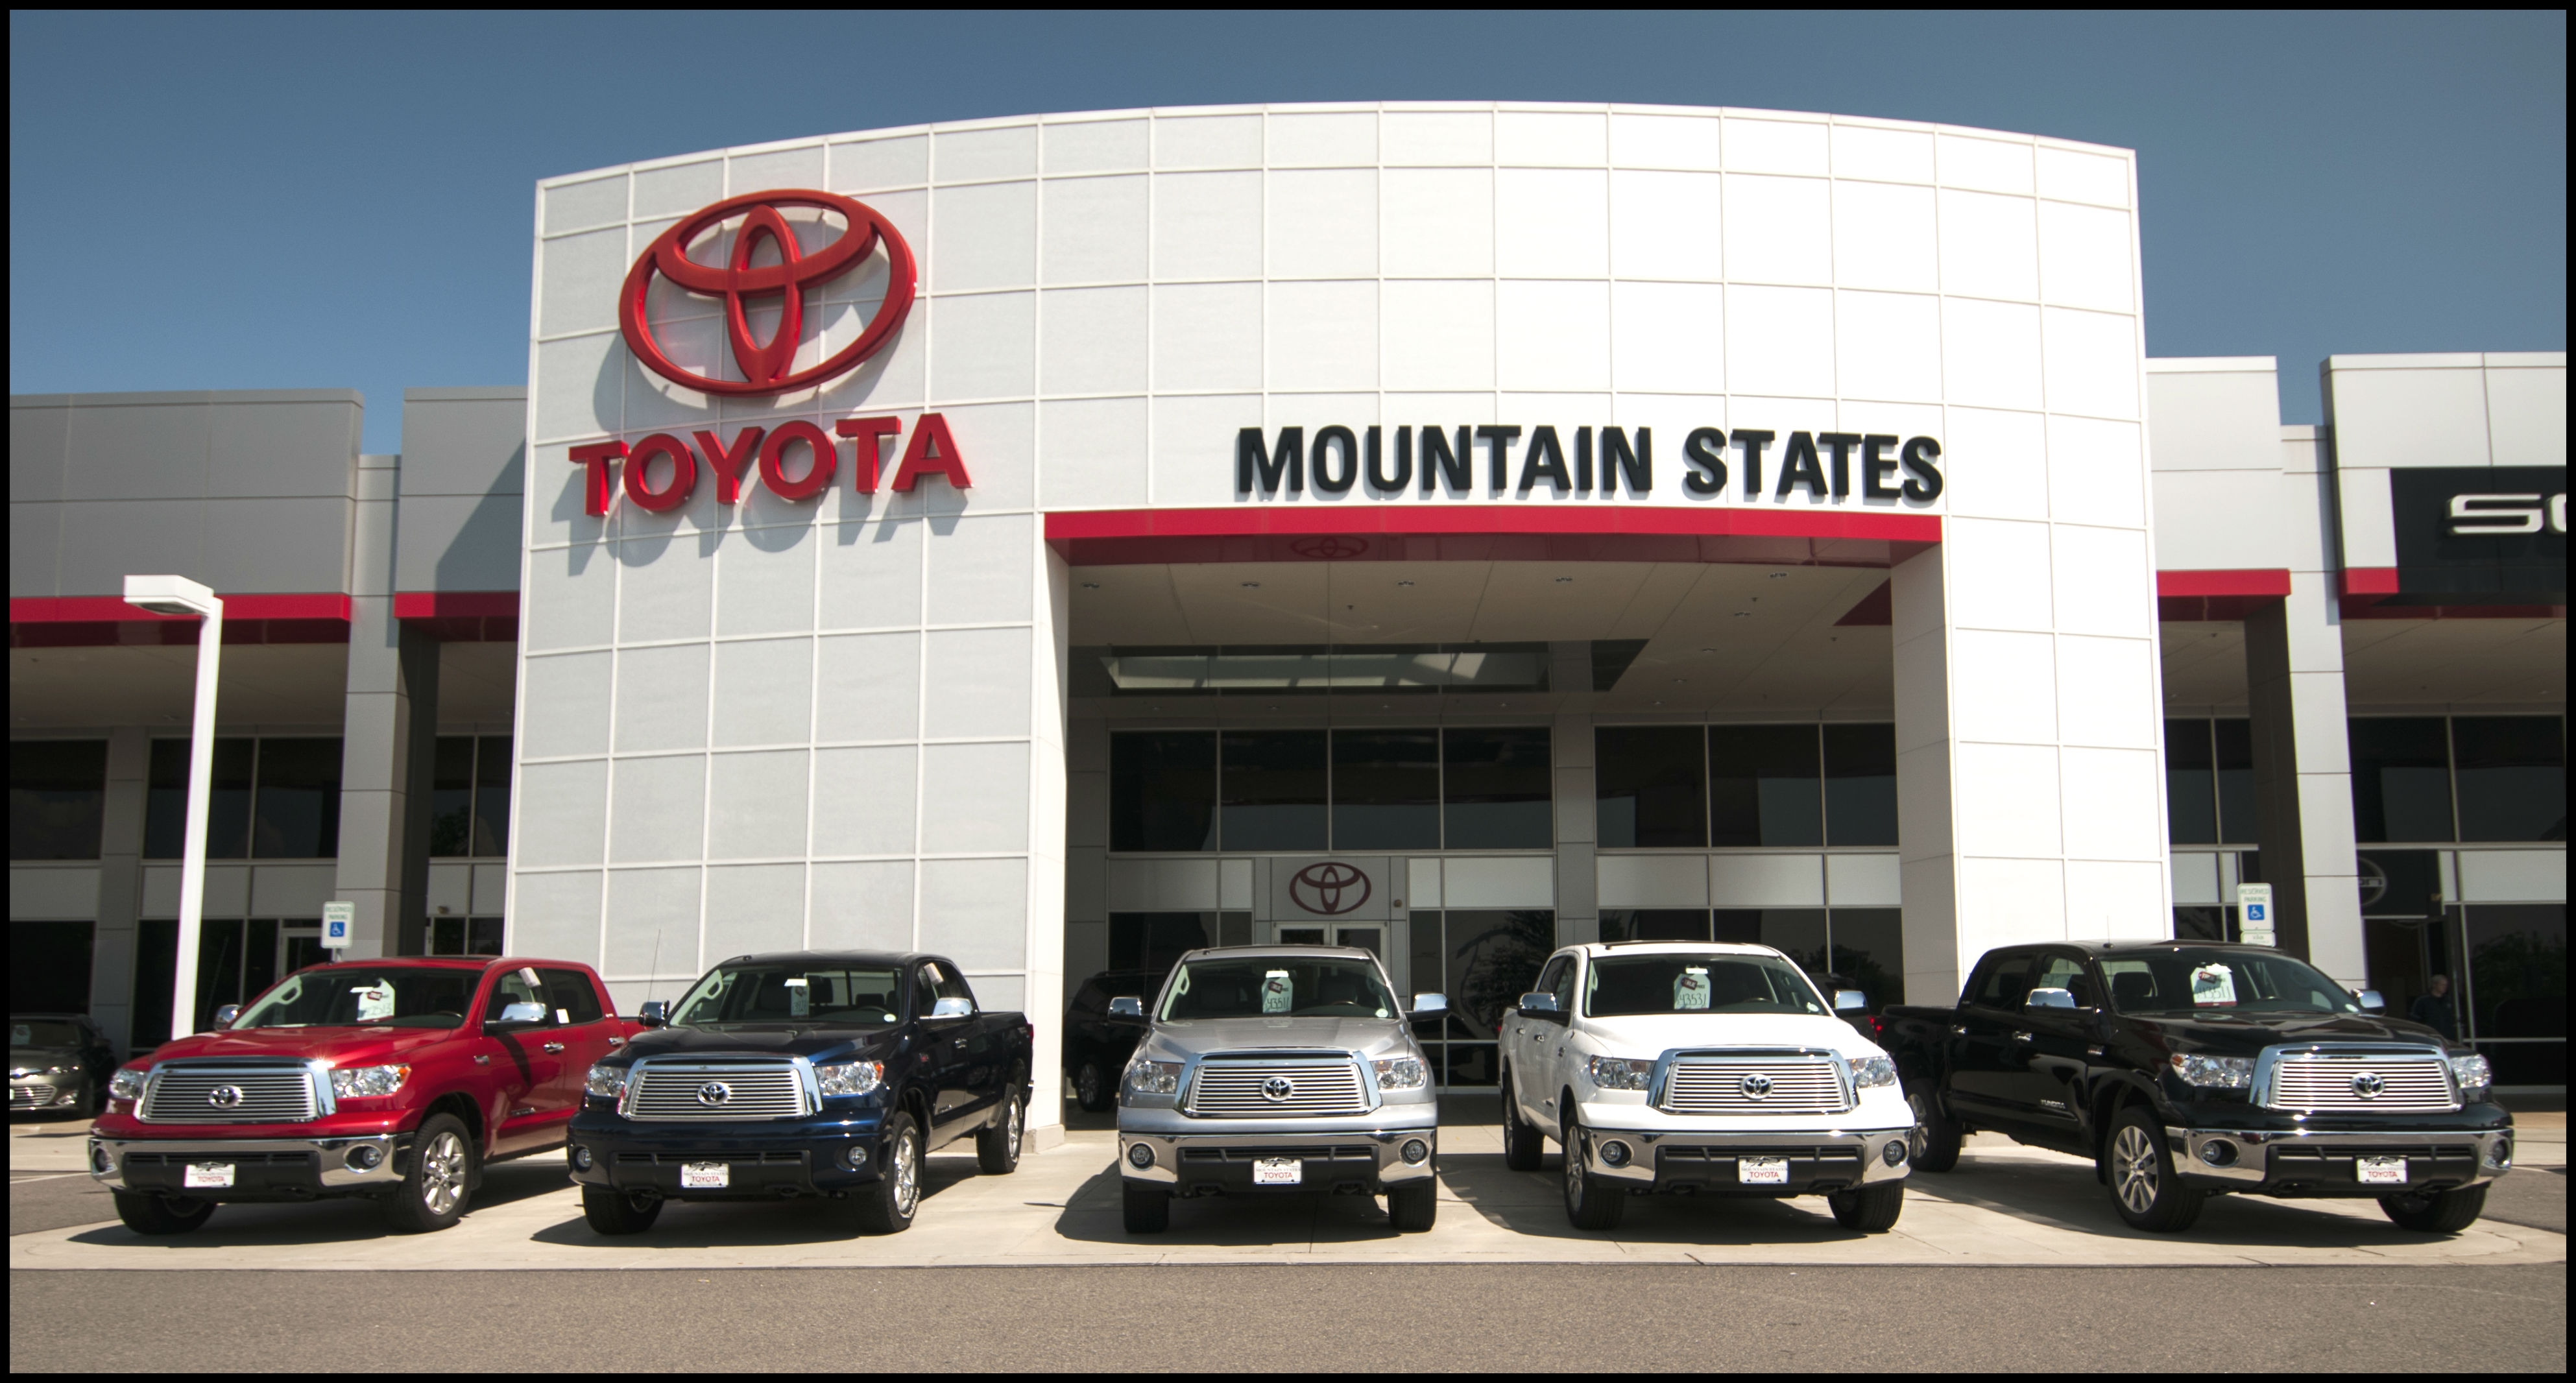 e to Mountain States Toyota in Denver for the best guest experience in the automotive industry